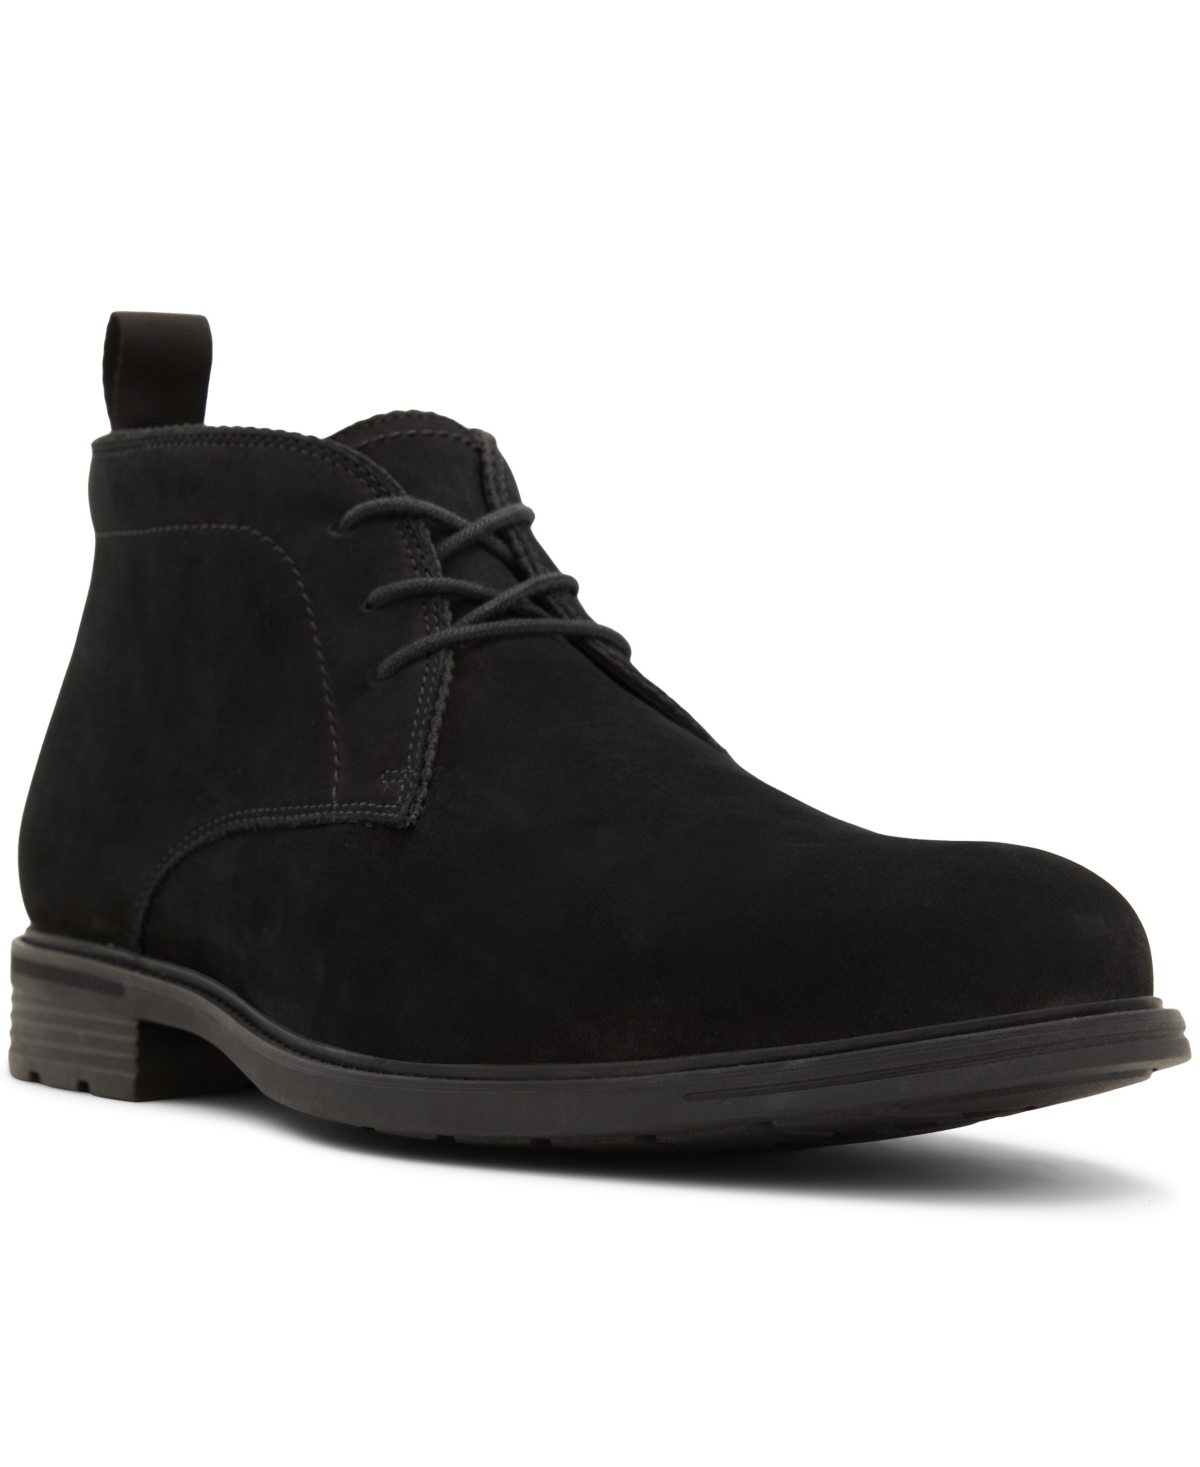 Men's Charleroi Ankle Lace-Up Boots - Black